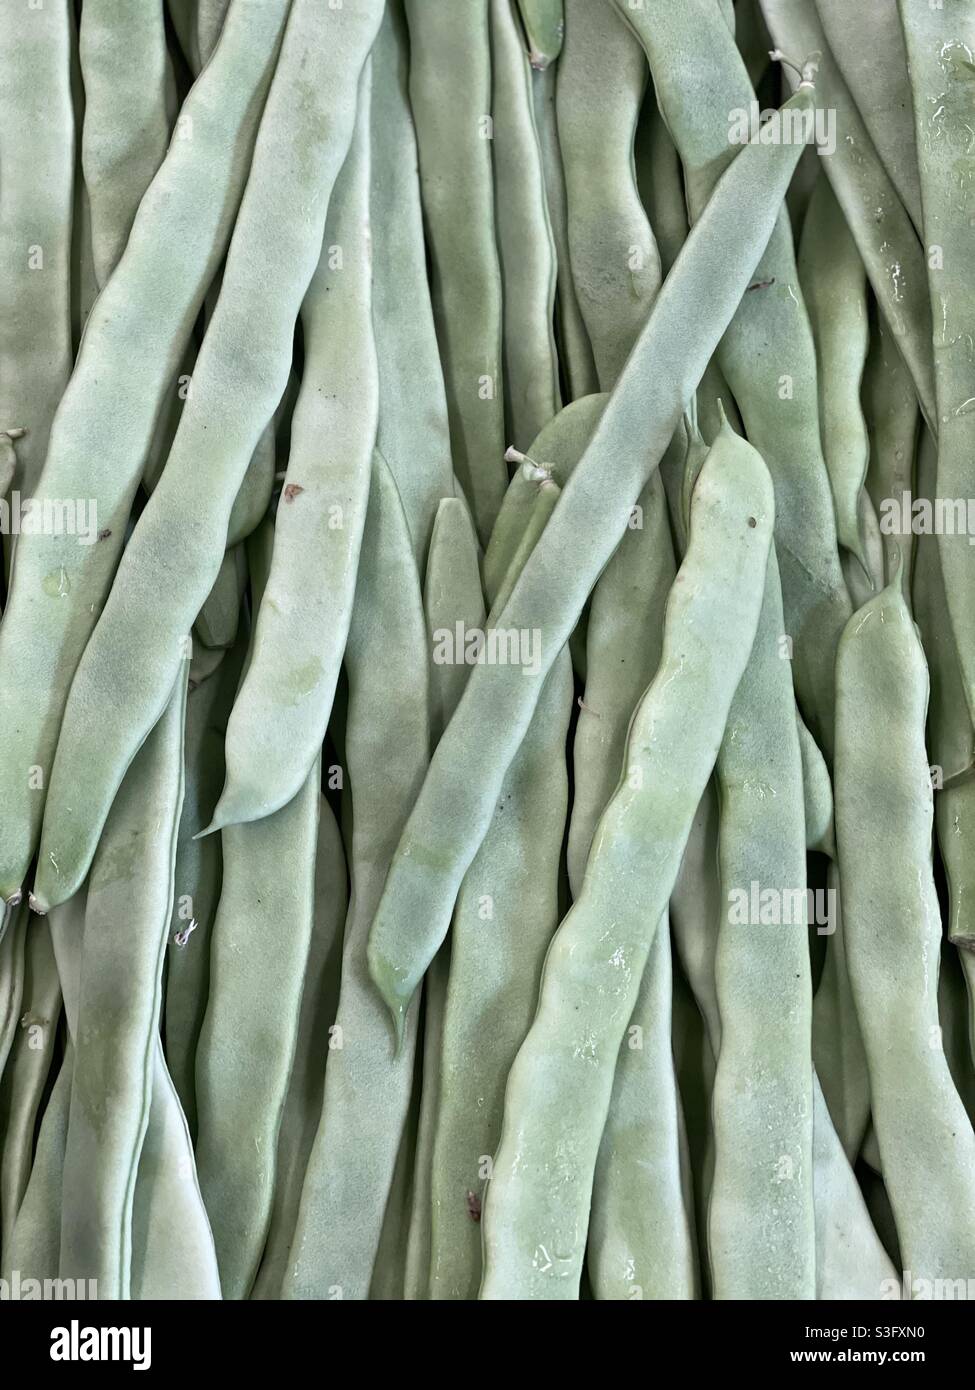 The taccola is a vegetable, a variety of pea with a light green color Stock Photo